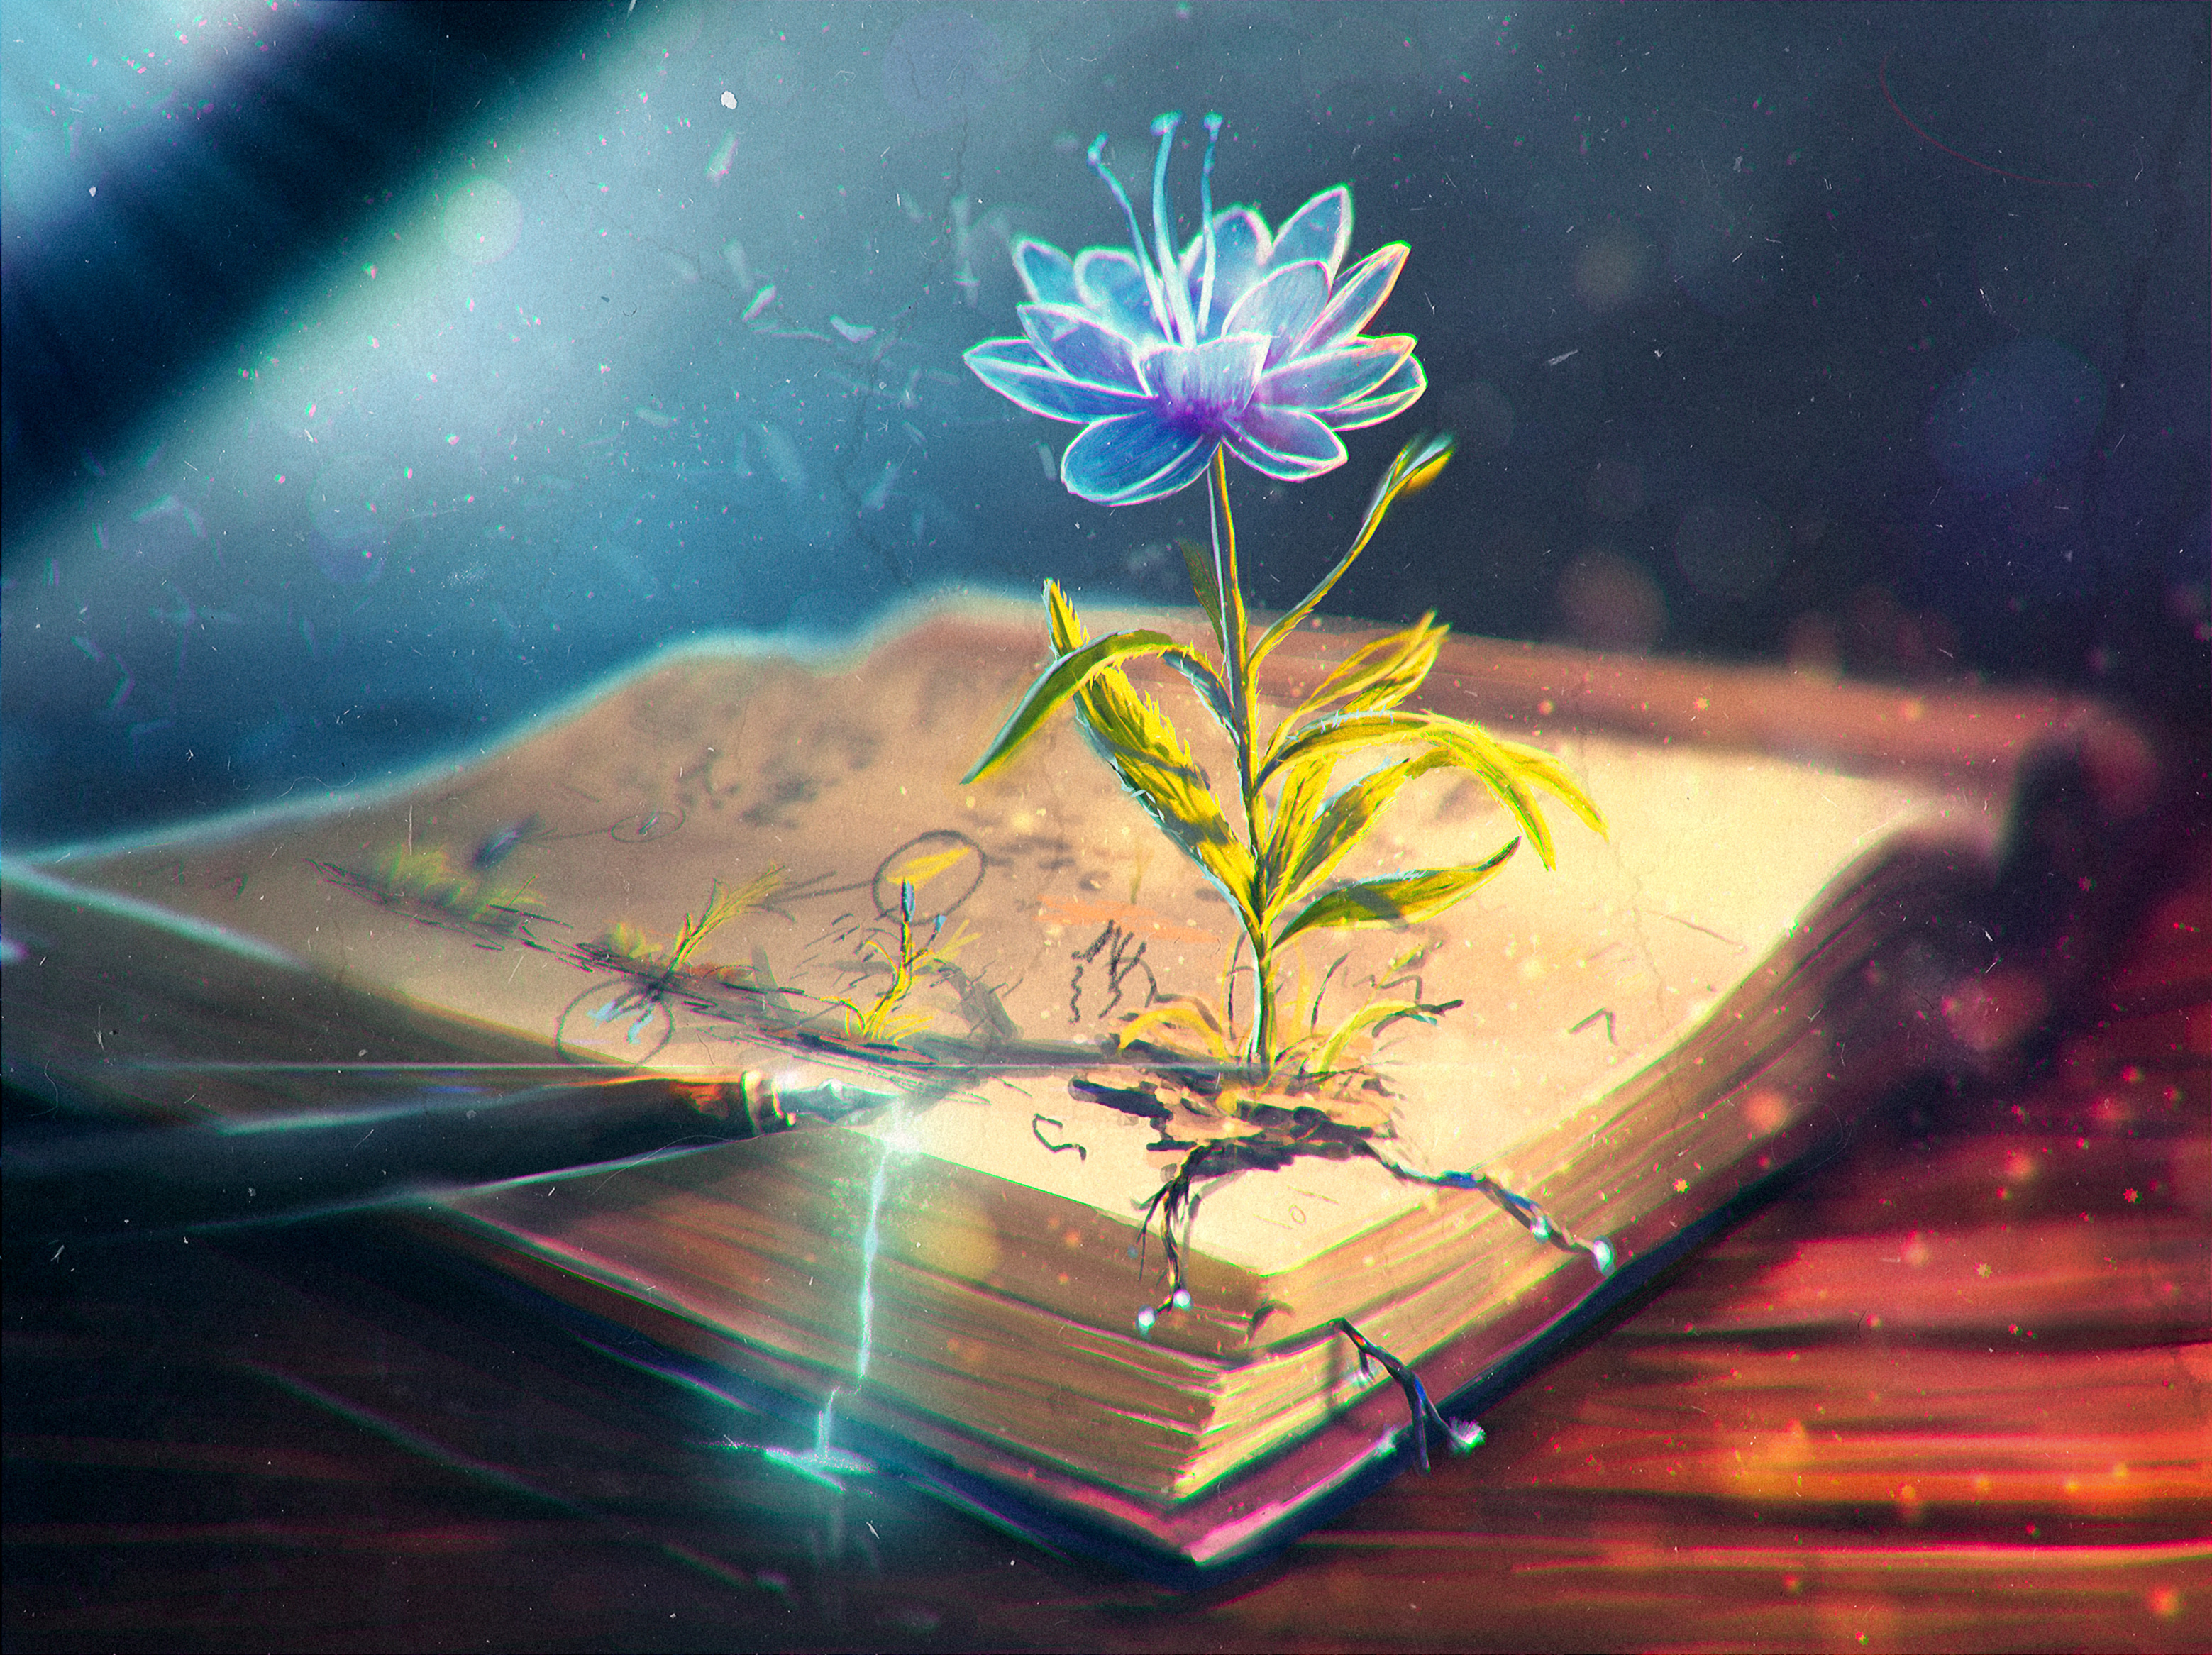 pen, flower, abstract, book, feather QHD